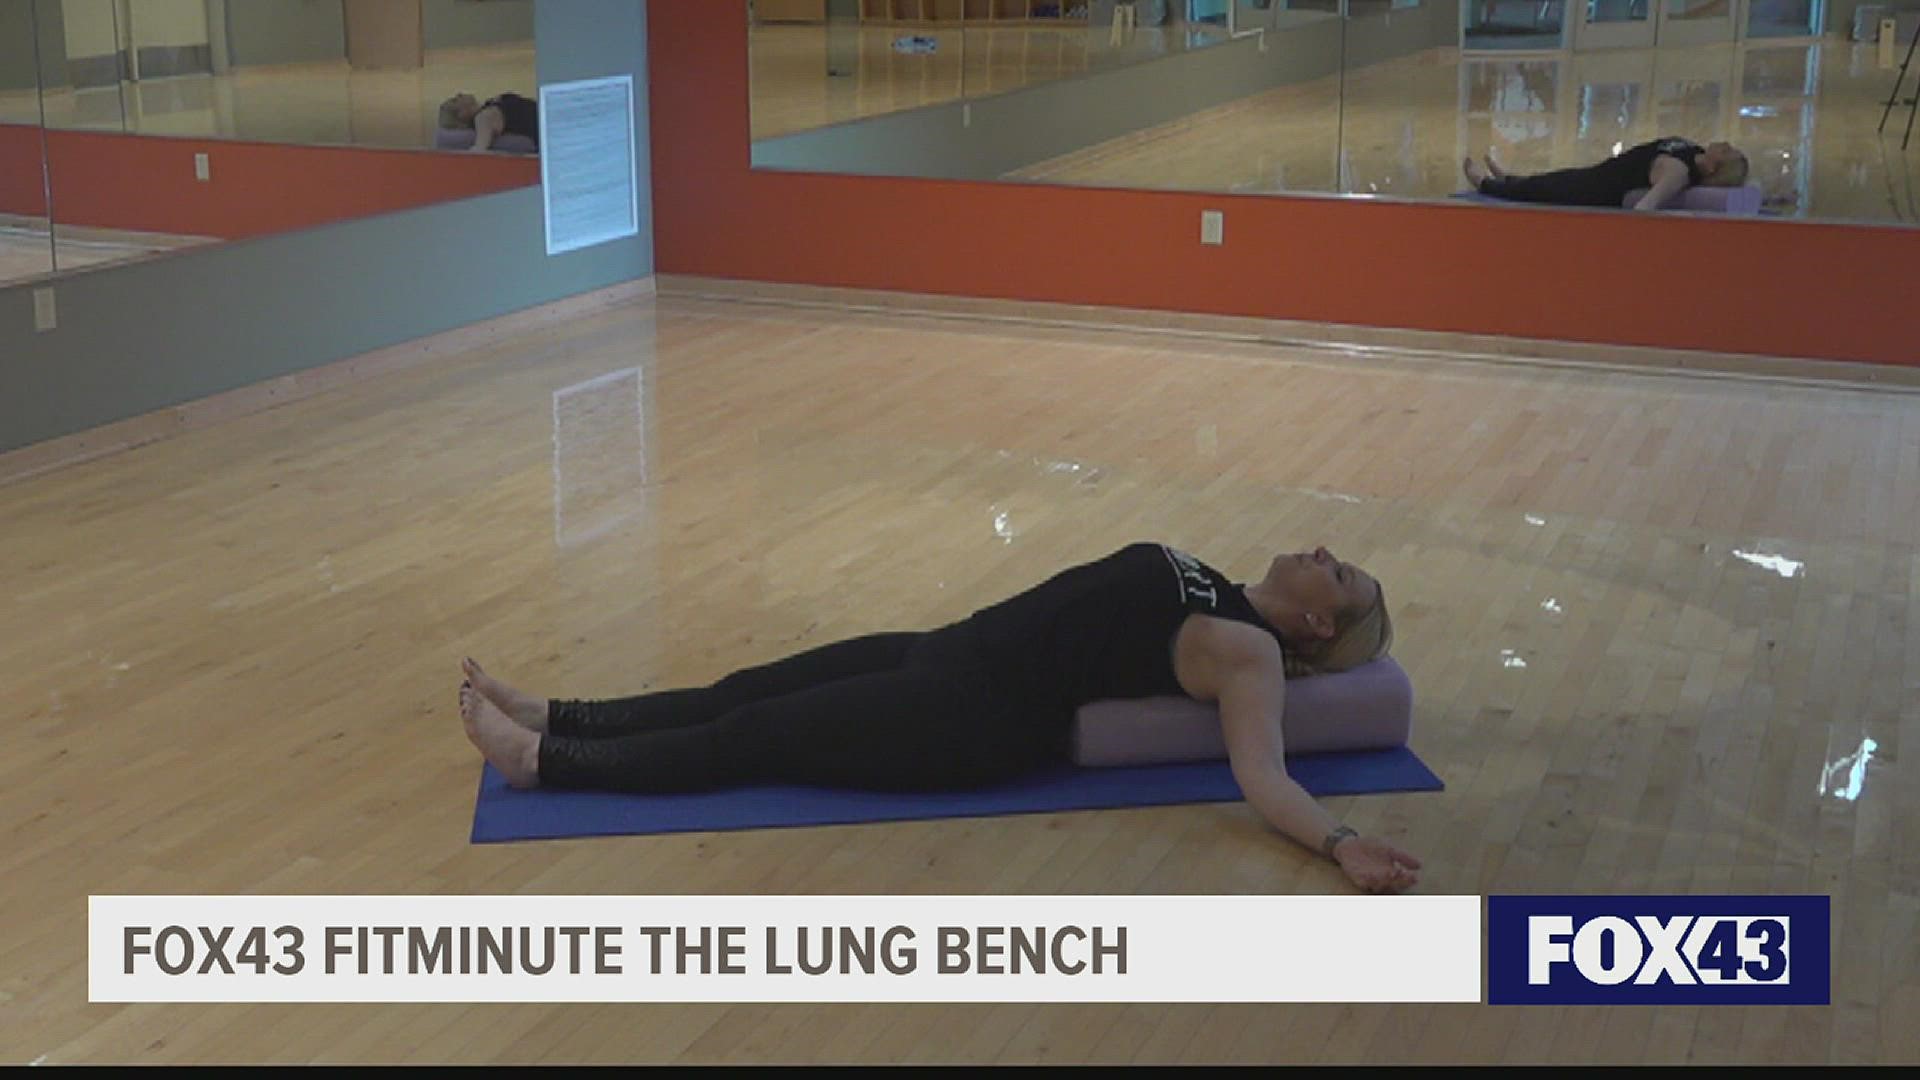 In this week's FOX43 FitMinute we'll focus on a yoga move that will help open up and stretch out the chest muscles!